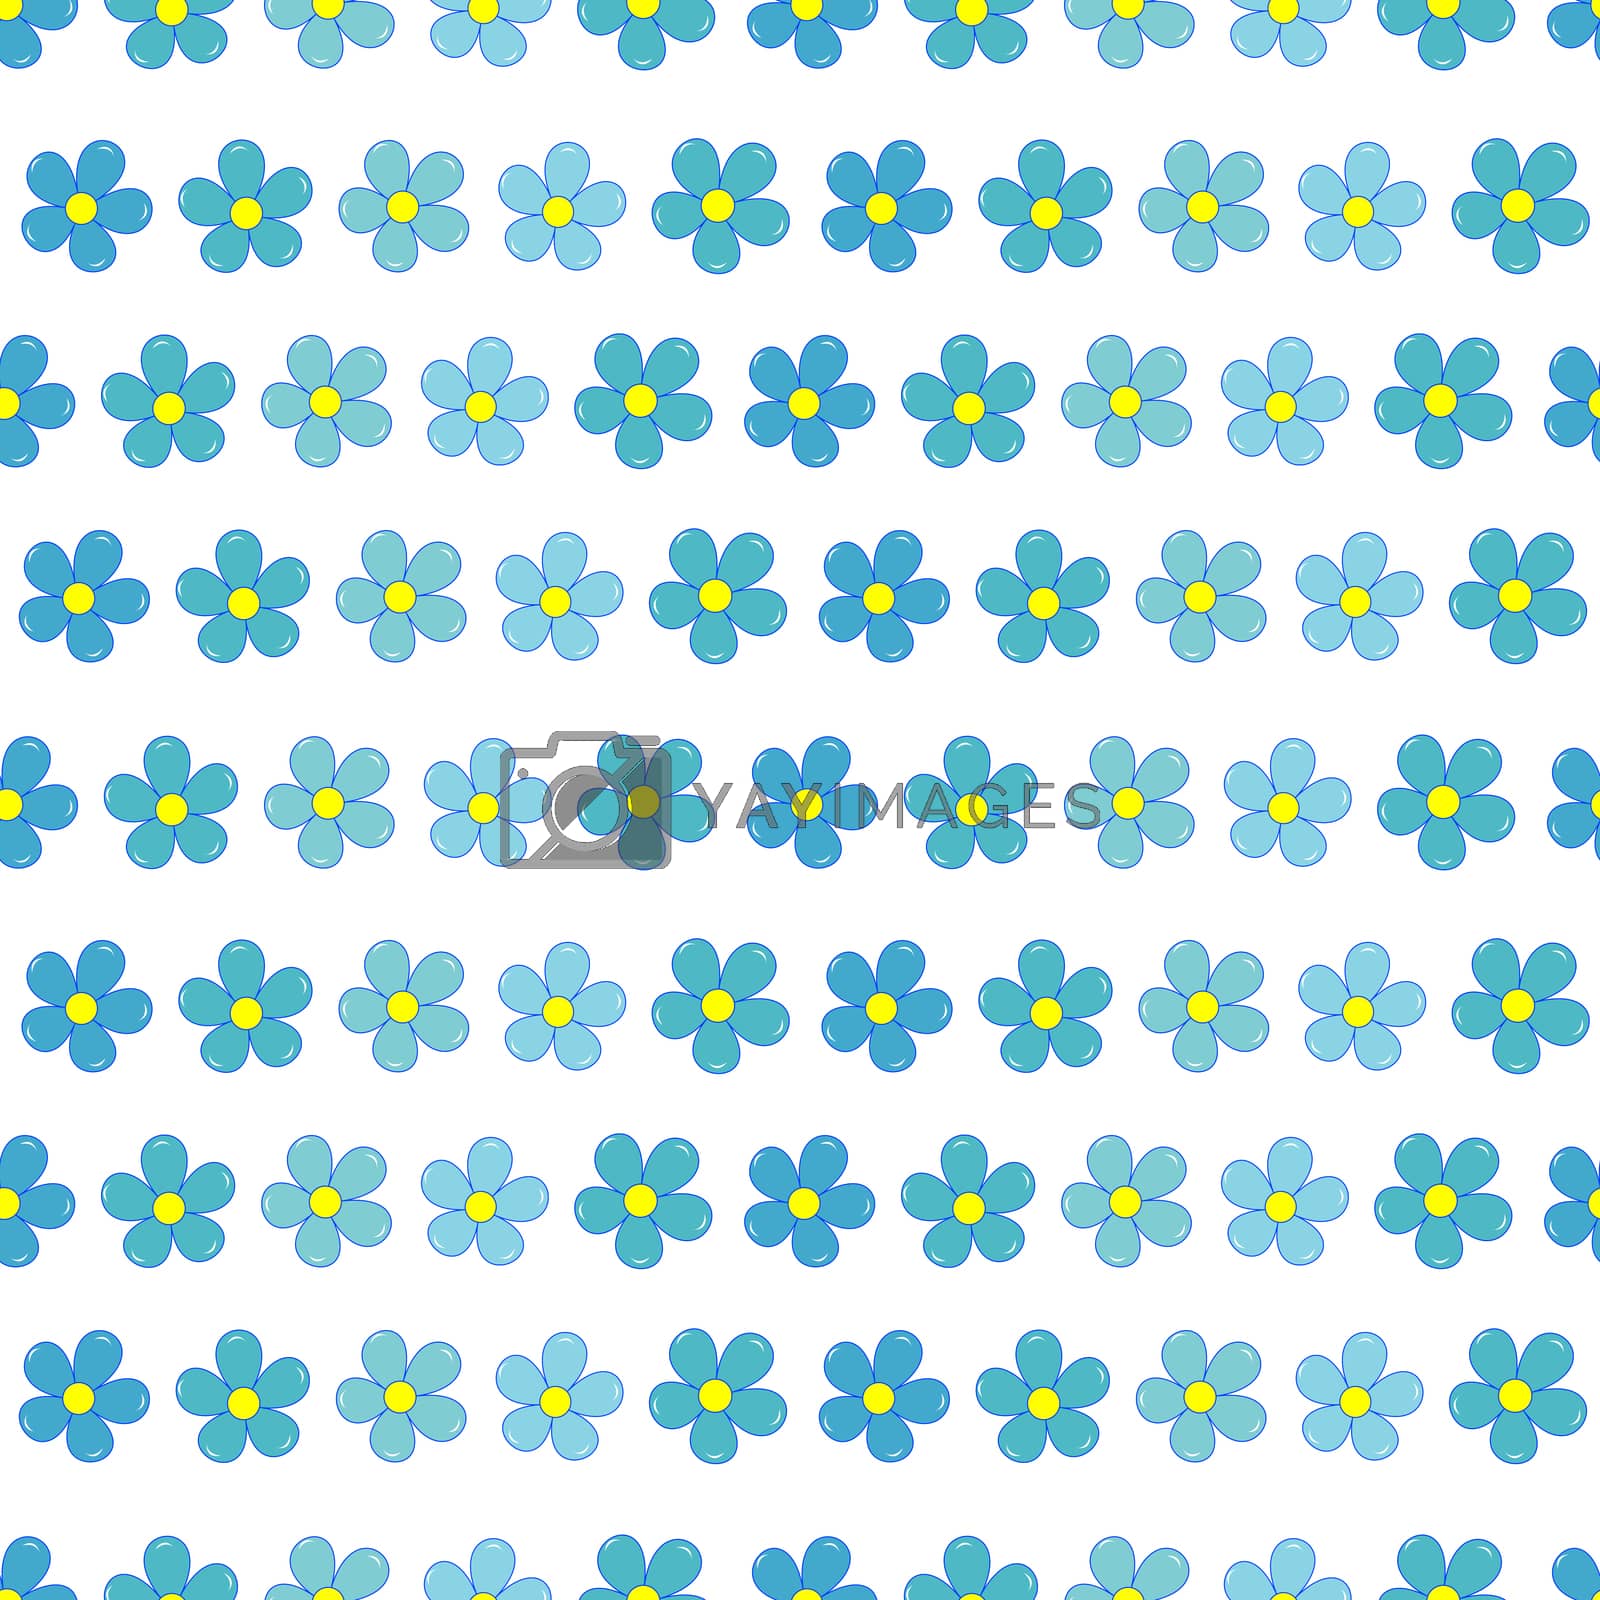 Royalty free image of Forget-me-not flowers seamless pattern by hibrida13